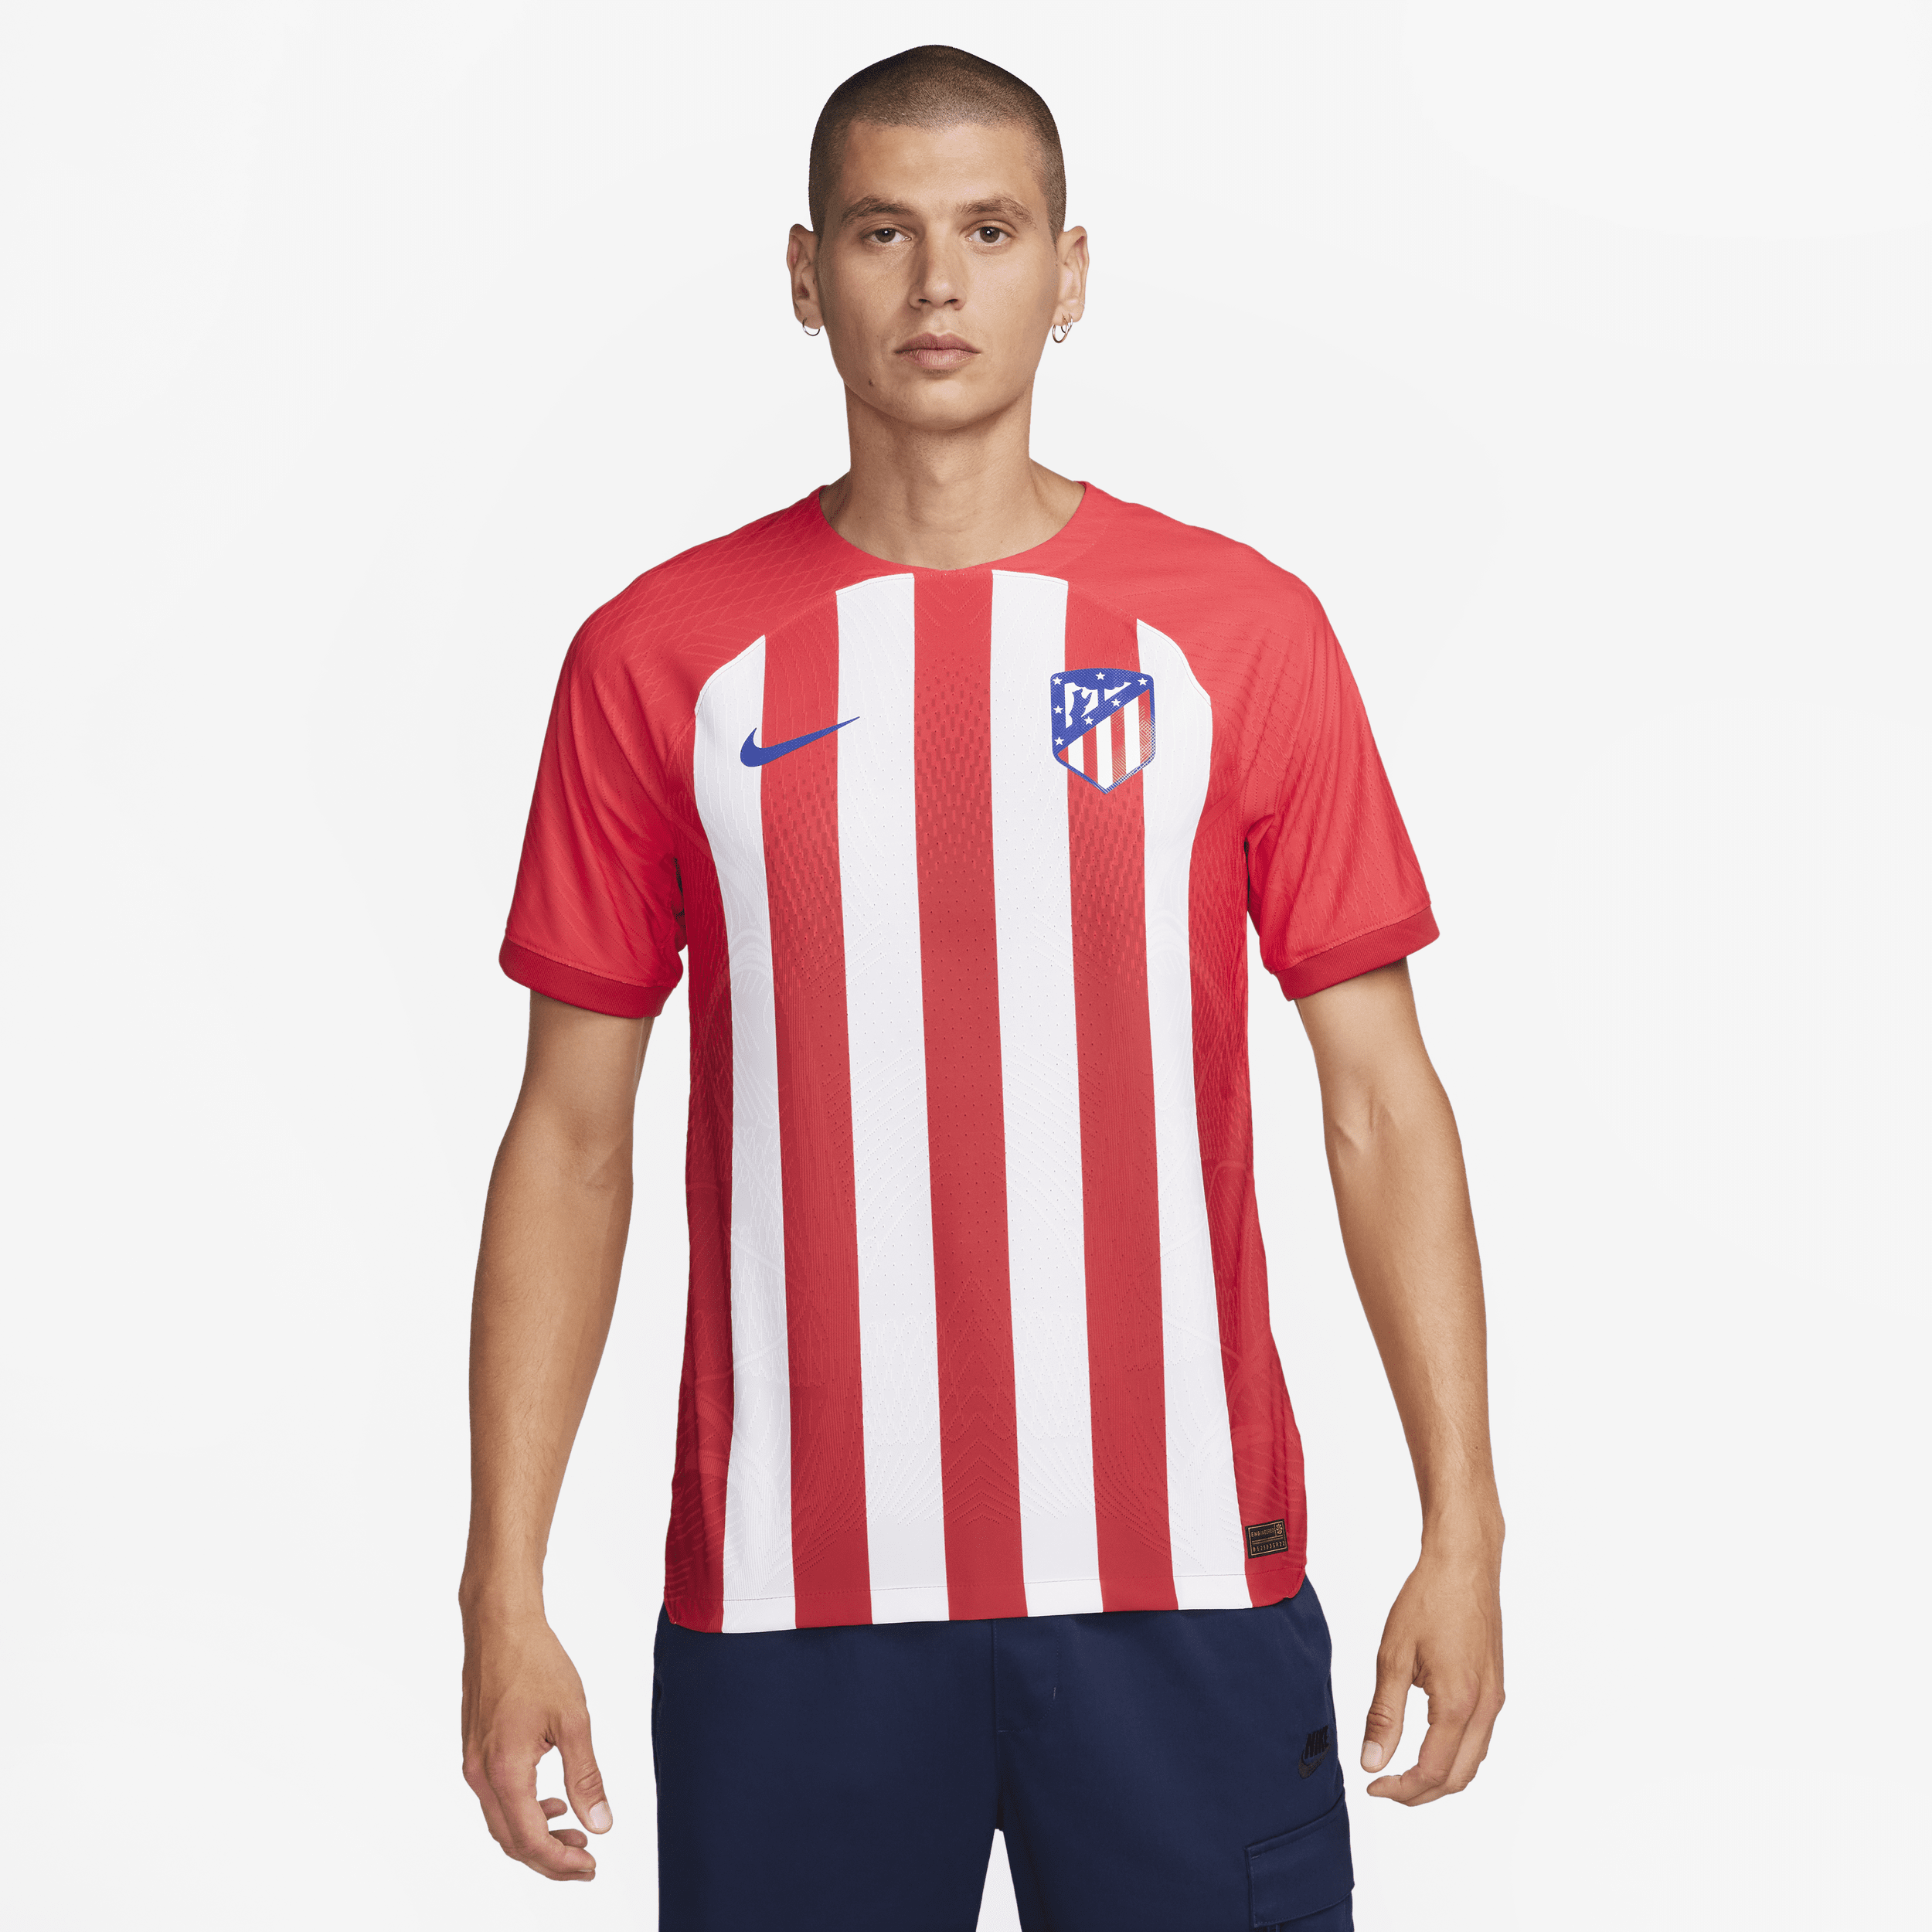 Atlético Madrid 2023/24 Match Thuis Nike Dri-FIT ADV voetbalshirt voor heren - Rood